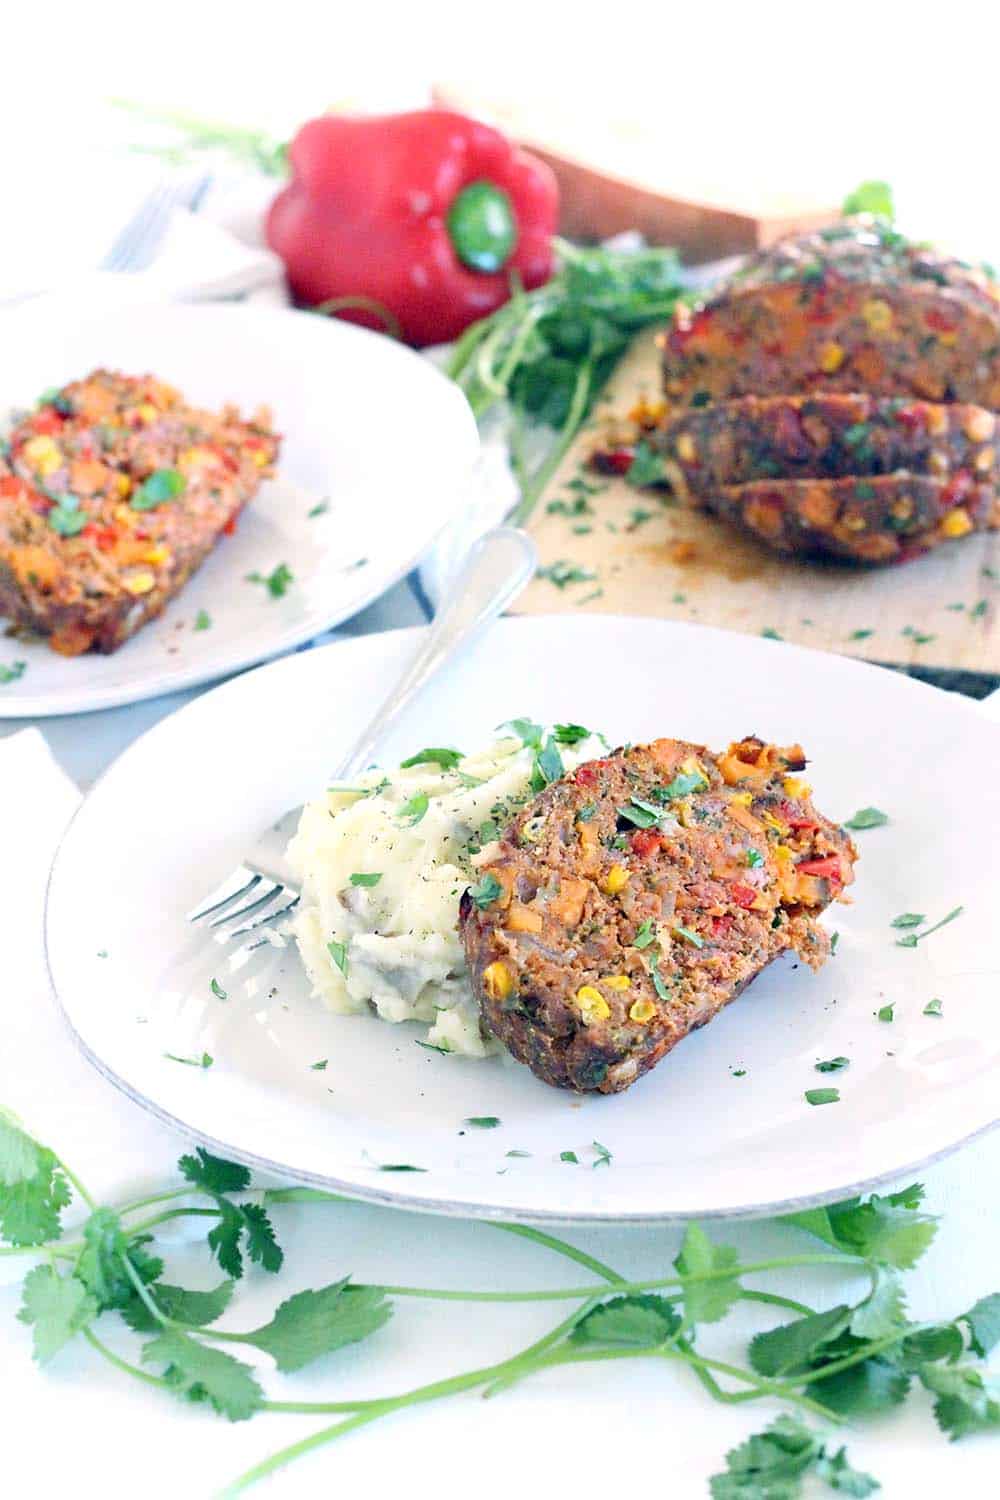 This Southwestern Meatloaf is a healthy, gluten-free option, PACKED with roasted veggies and bursting with Southwestern flavor. It's easy to make this ahead and freeze for later!